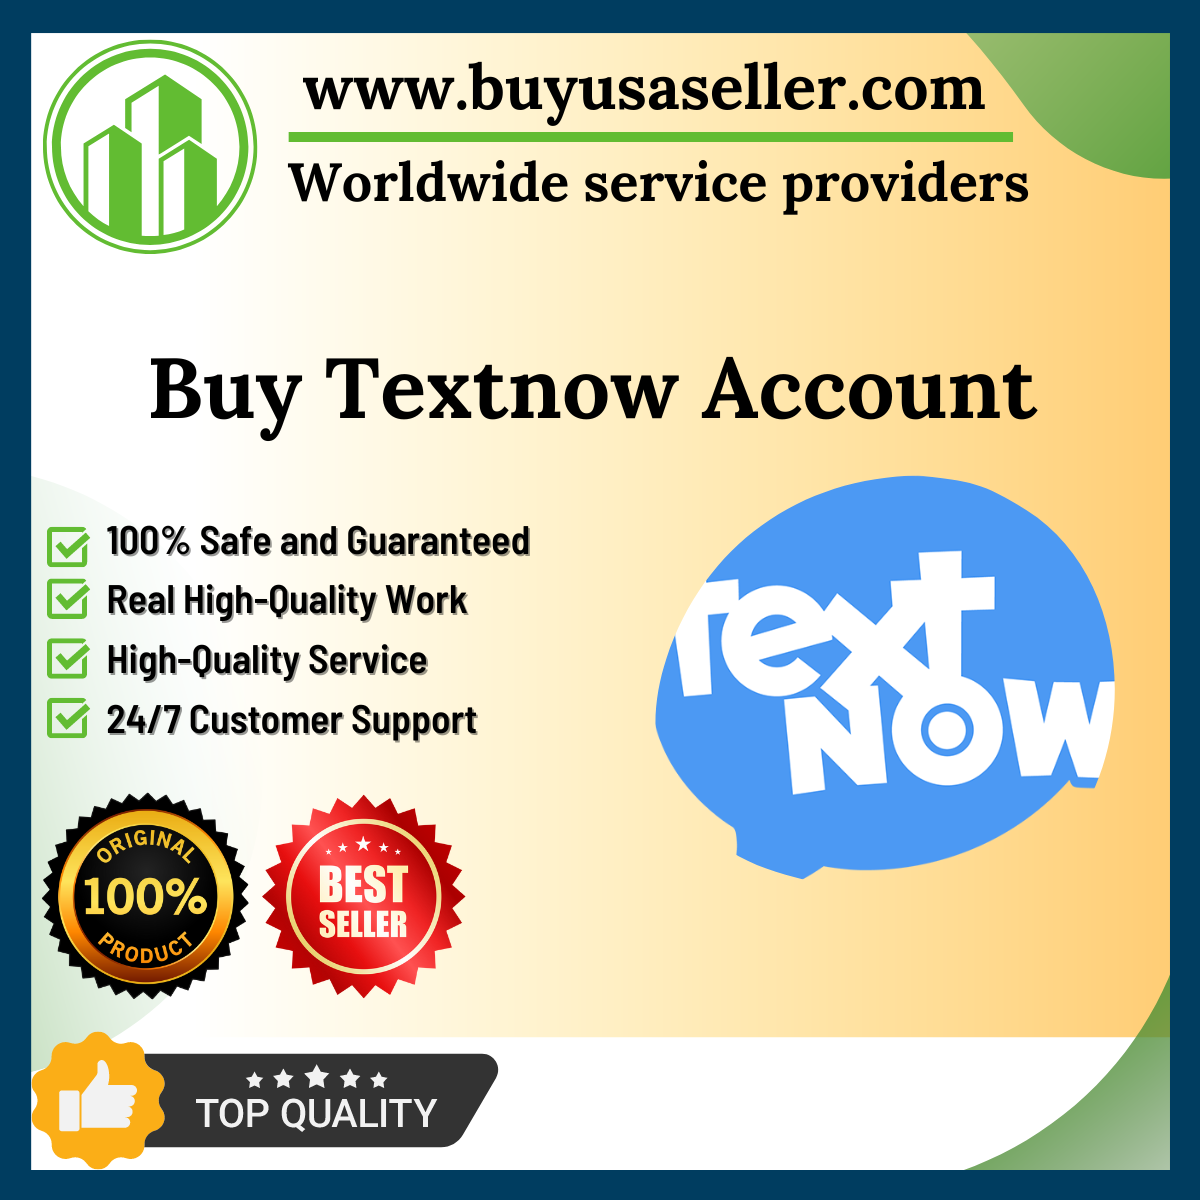 Buy Textnow Accounts TextNow Add-ons, Plans, and SIMs